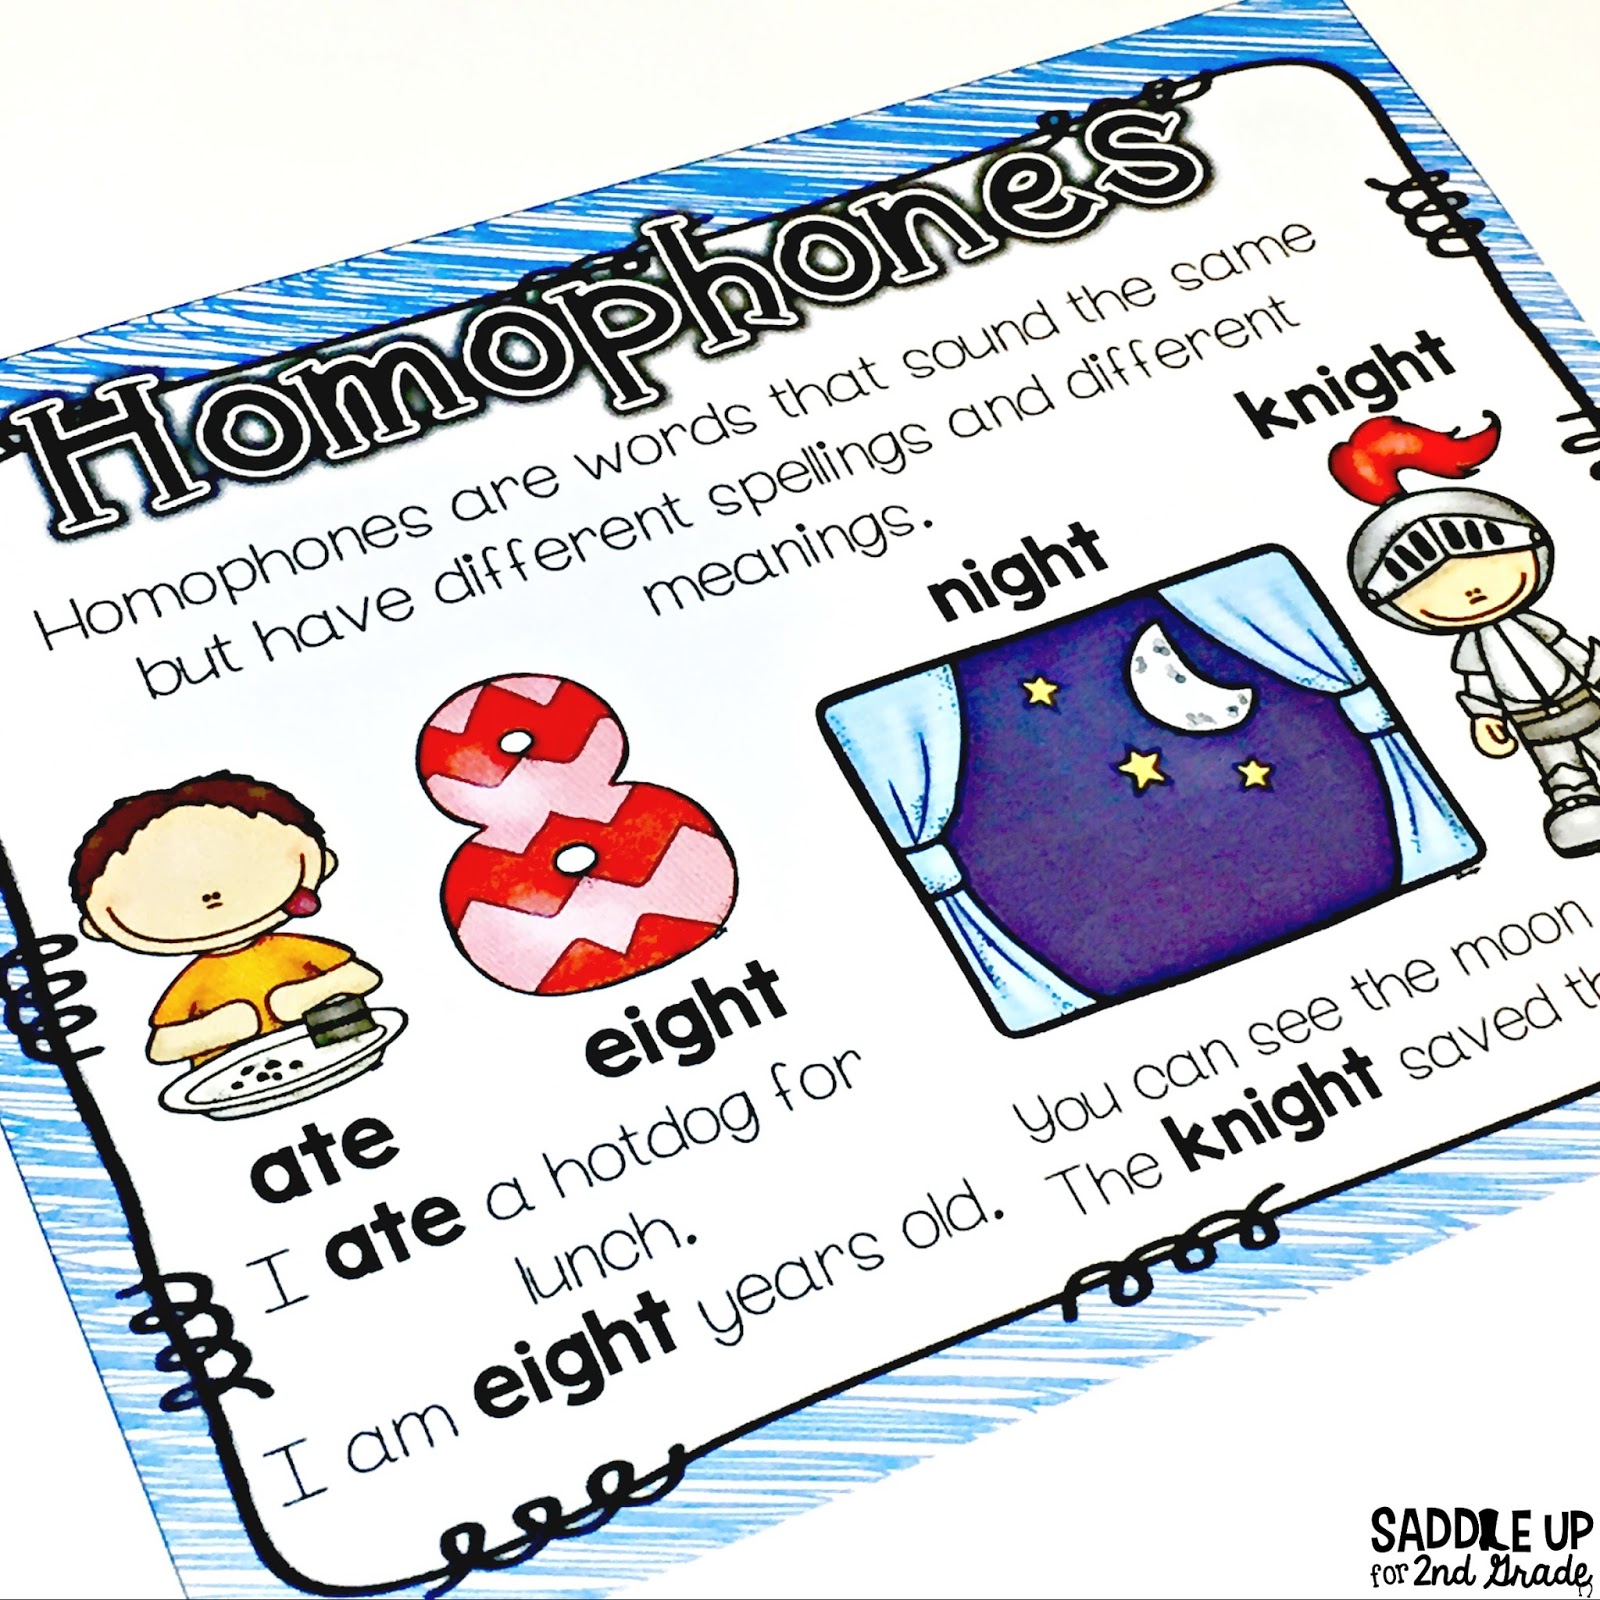 Anchor chart posters are great visuals to use in your classroom to show what skills you are currently focusing on. This is a set of 45 colored and black and white posters that cover comprehension, vocabulary and fluency skills. You may print them to display in your classroom or use on a focus wall. You can also print them smaller to use in journals. 